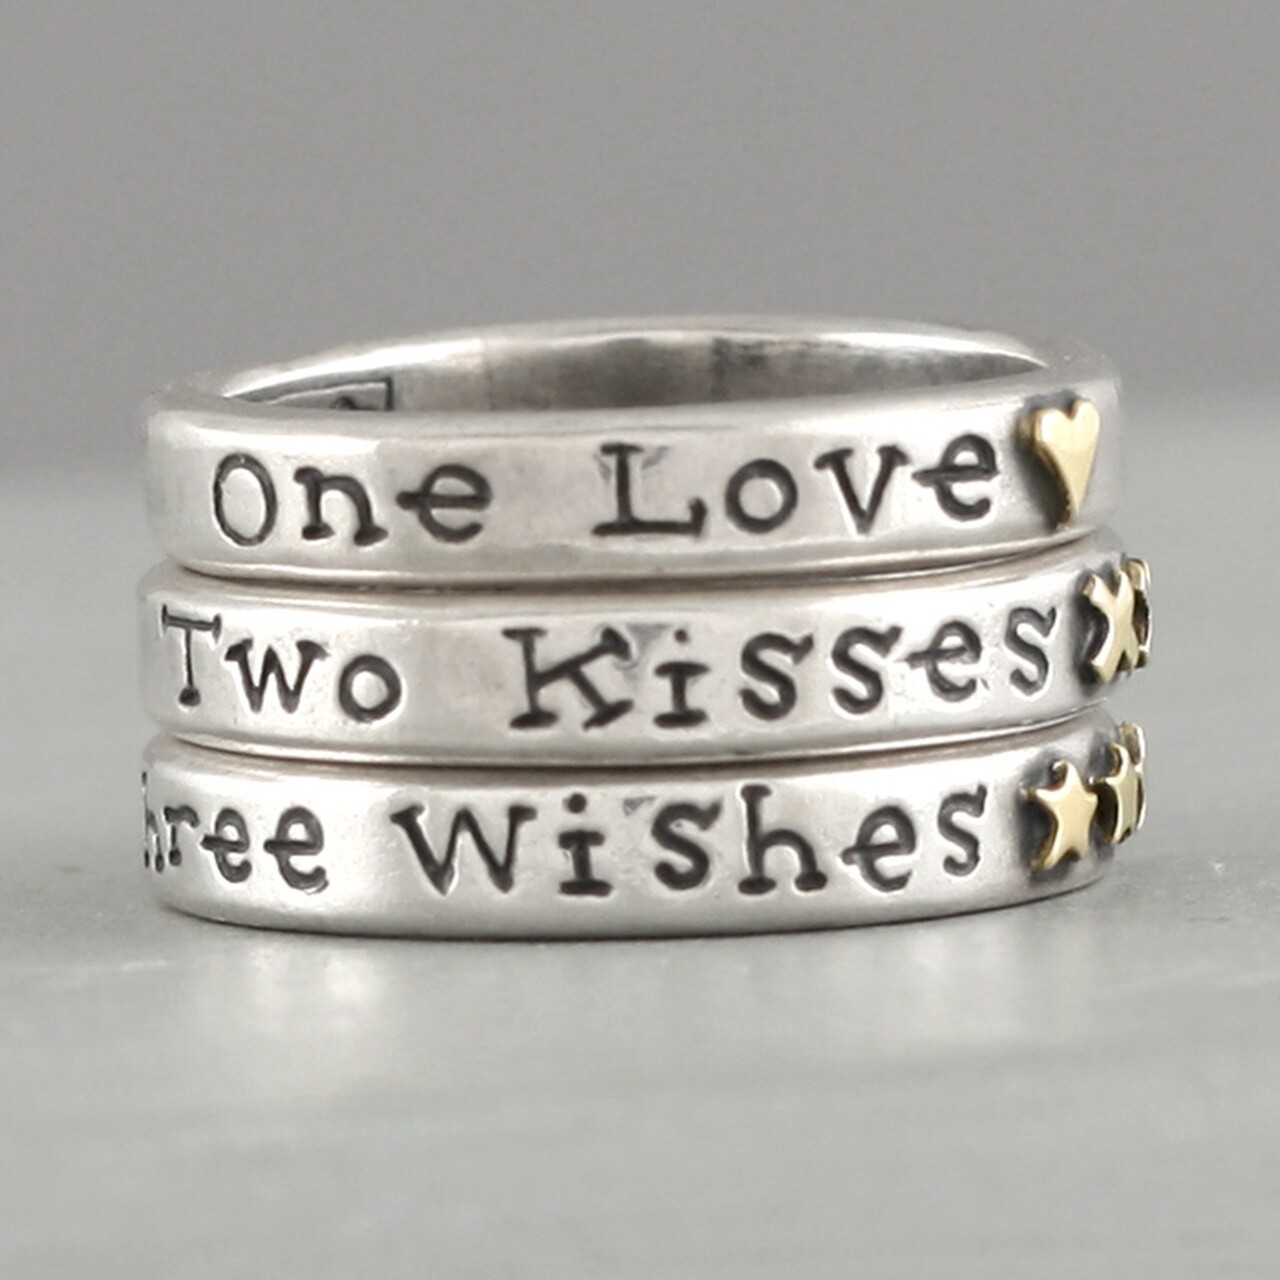 One Love Set of Three Silver and 9ct Gold Rings by Nick Hubbard